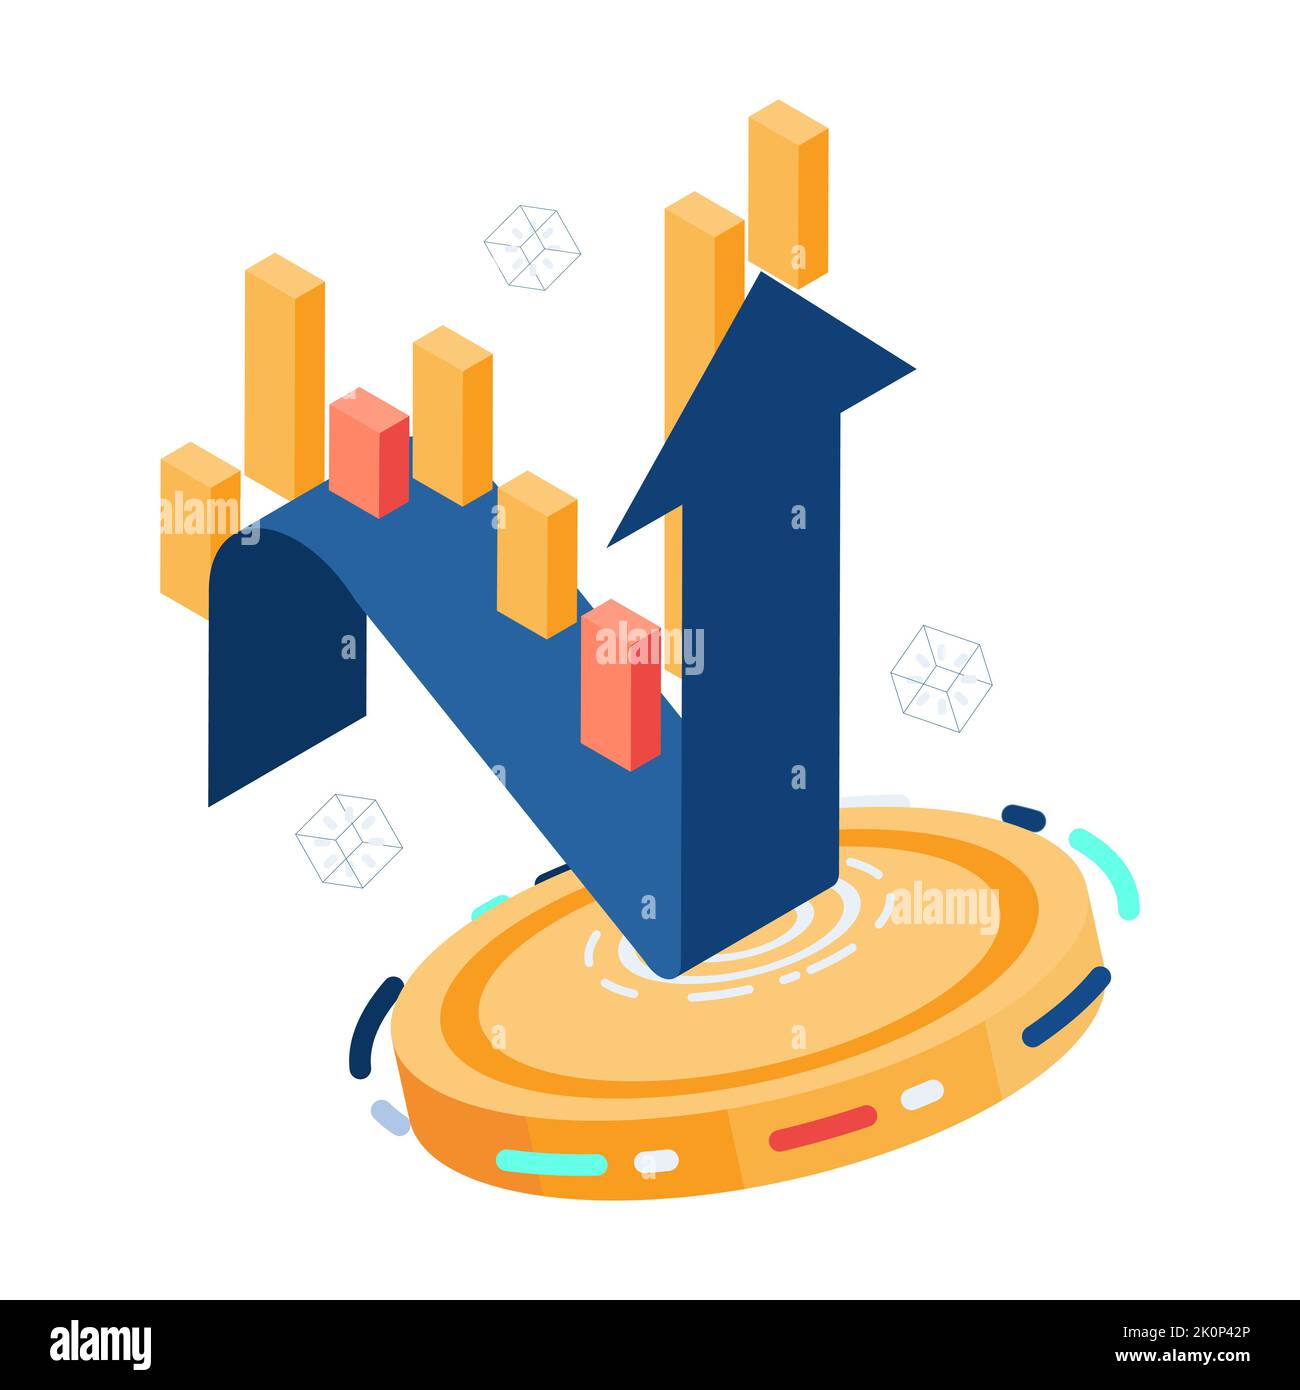 Flat 3d Isometric Coin Reflect Falling Financial Arrow. Cryptocurrency Stablecoin and Financial Concept. Stock Vector